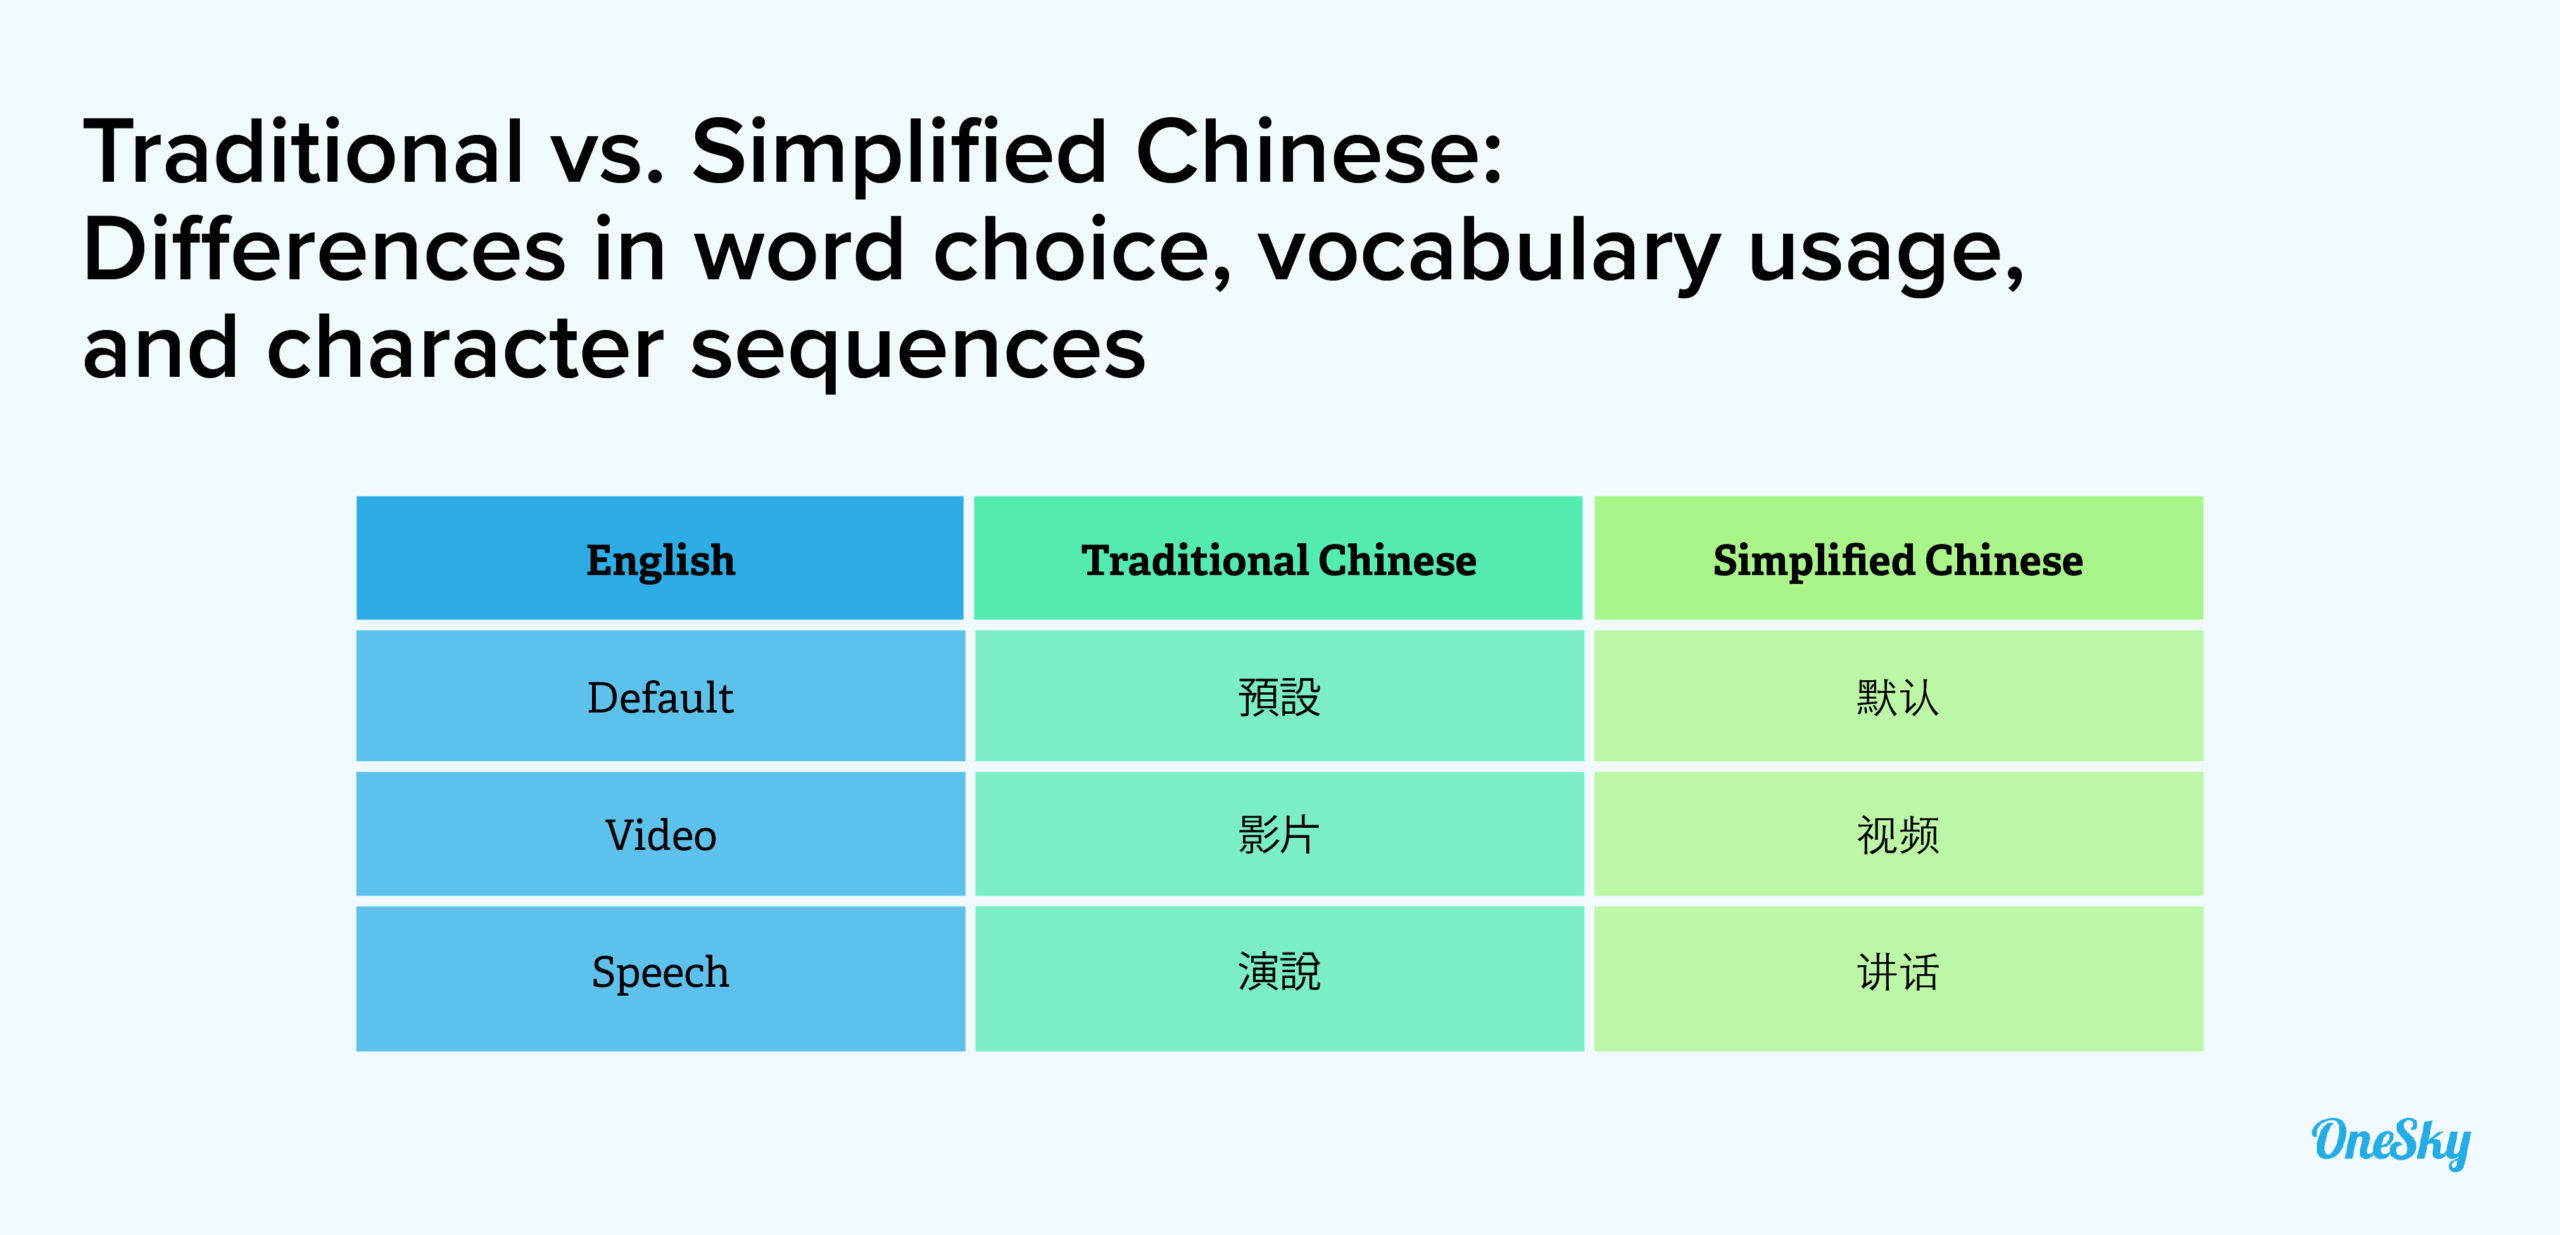 Similarities and Differences Between Traditional Chinese and Simplified Chinese